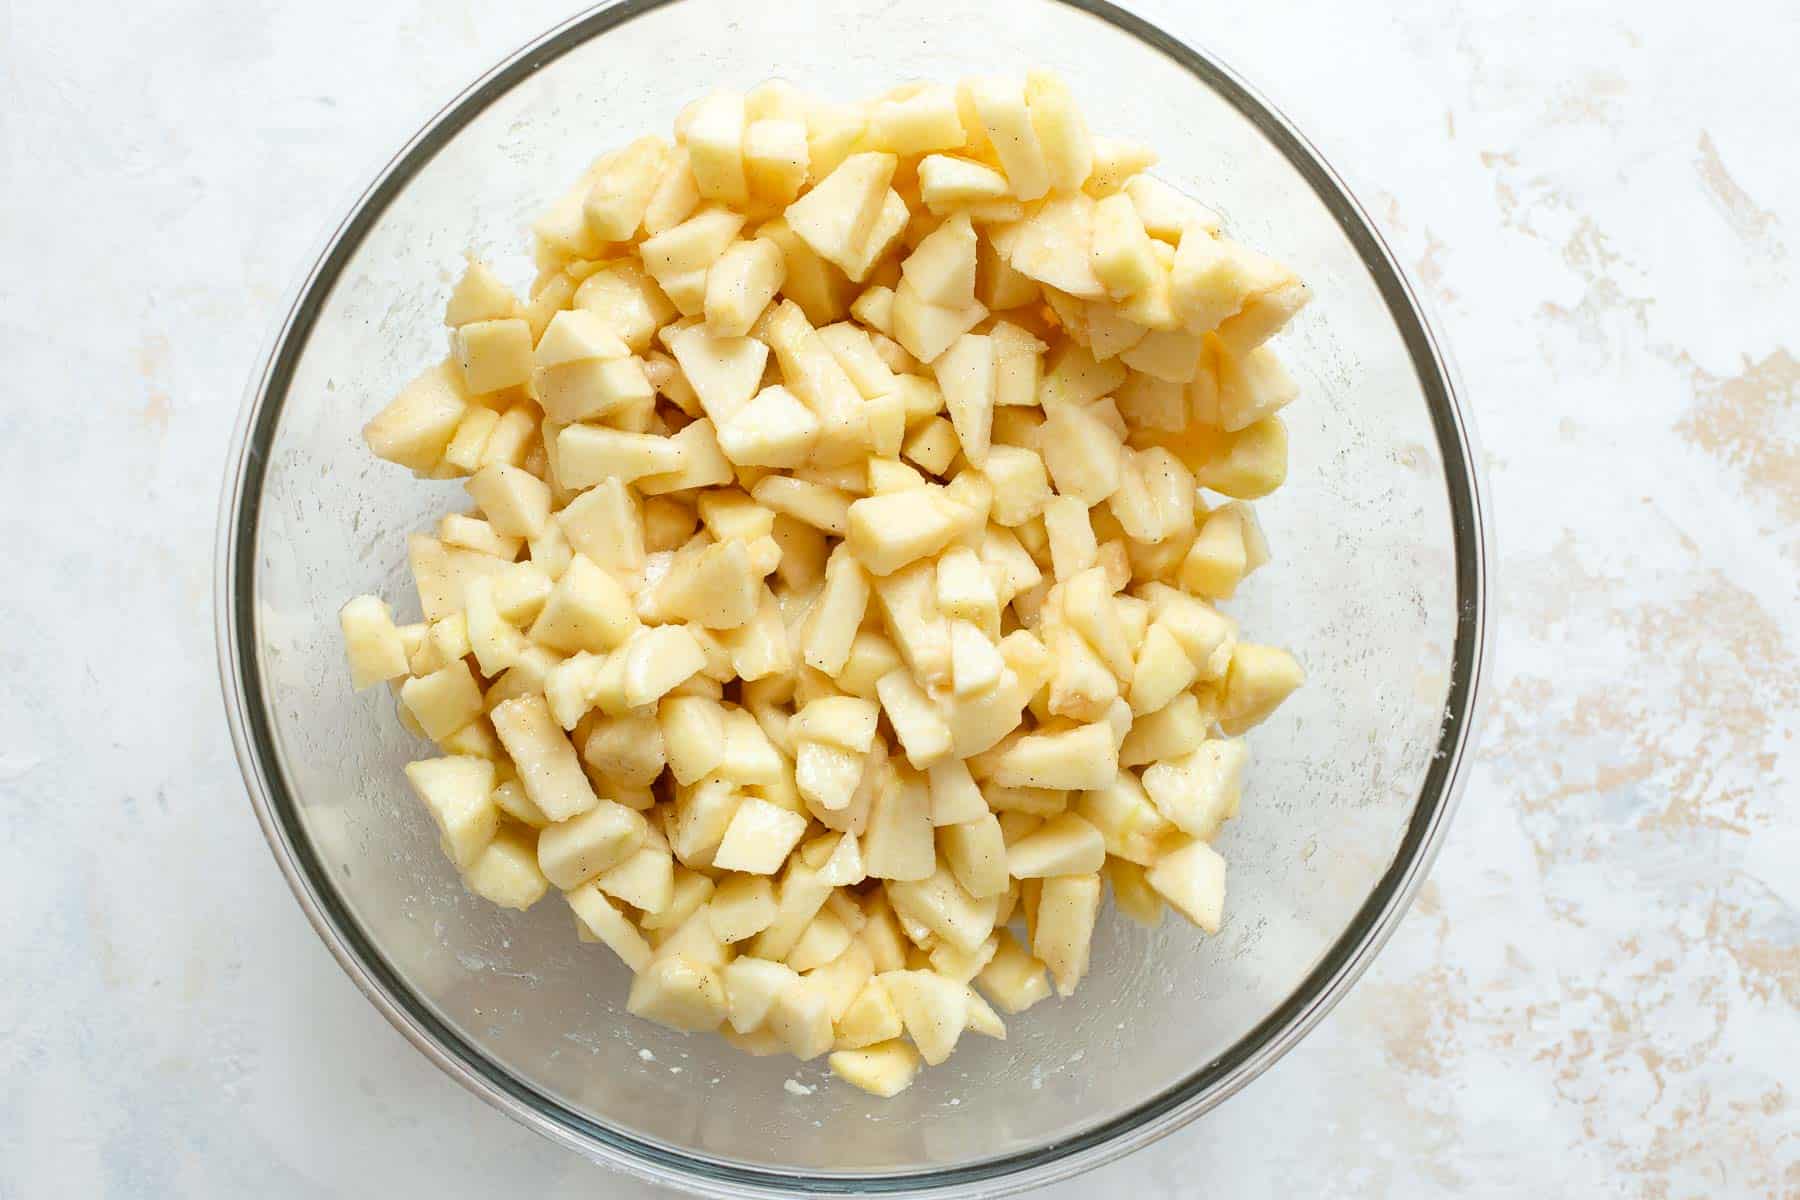 diced apples in glass bowl